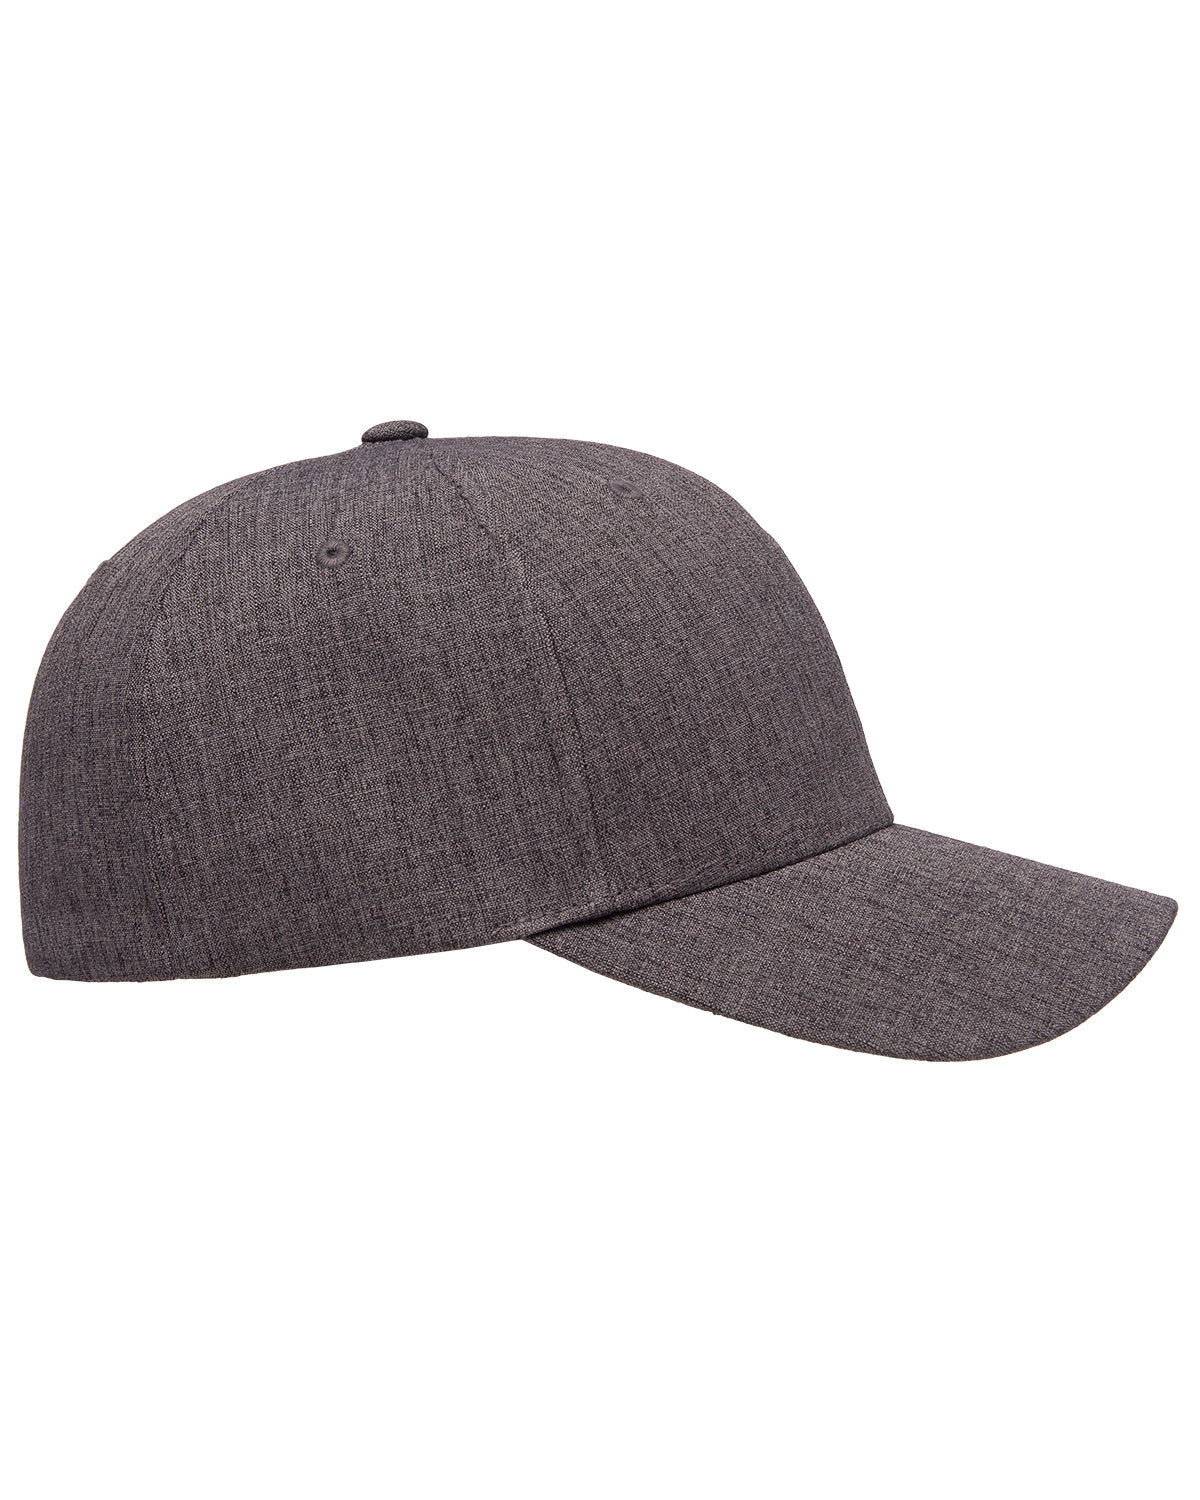 Grey featherlight cap side view